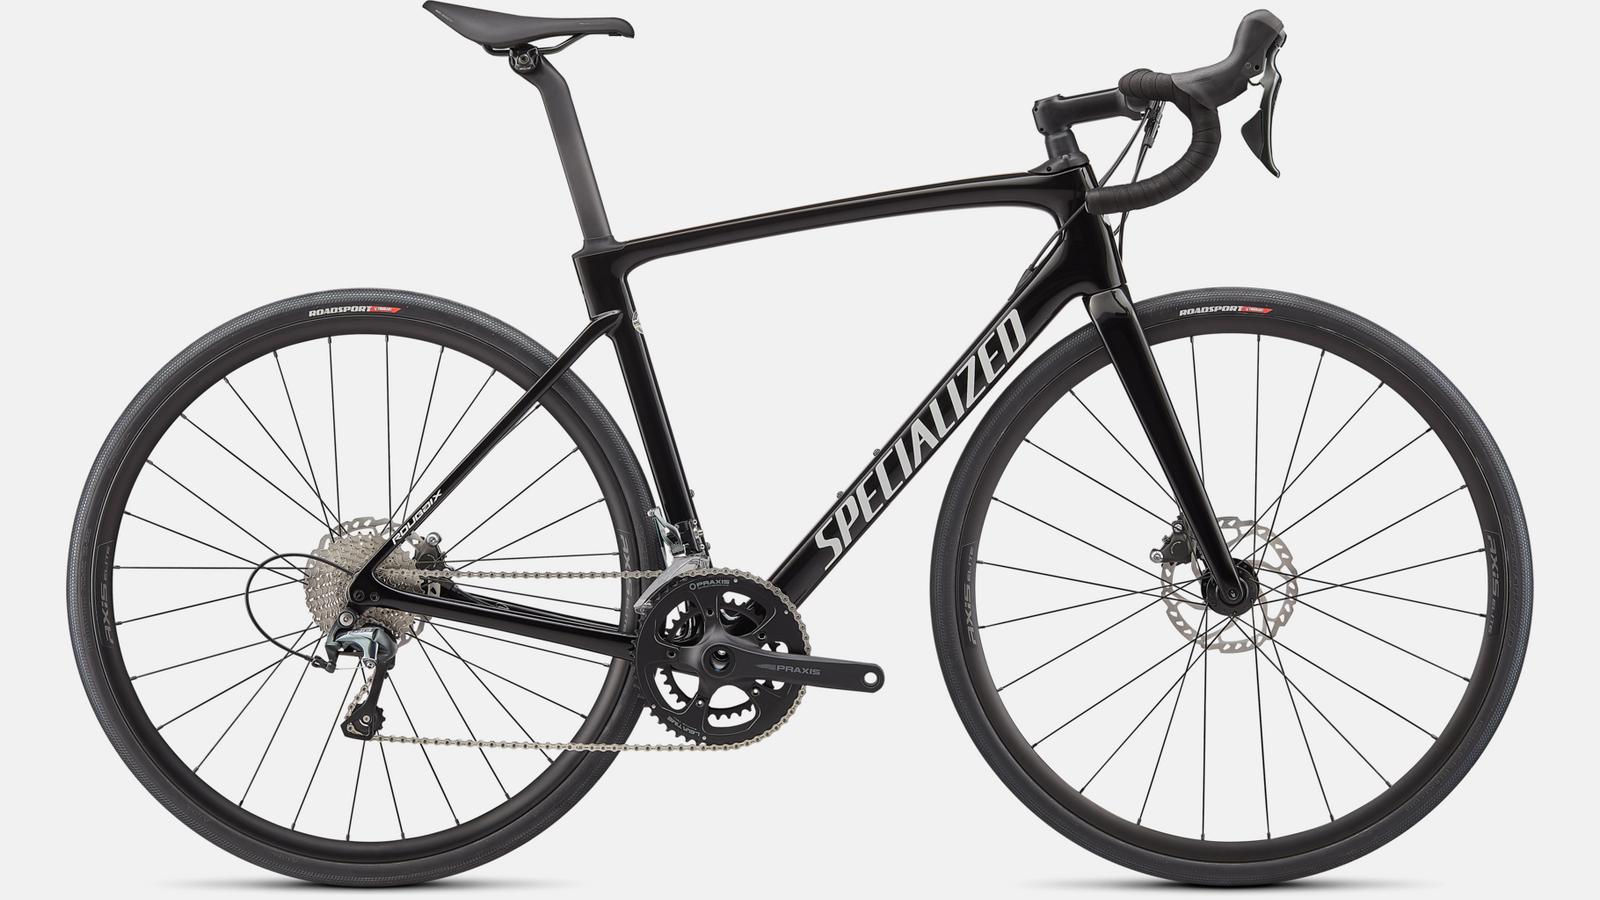 Paint for 2022 Specialized Roubaix - Gloss Tarmac Black